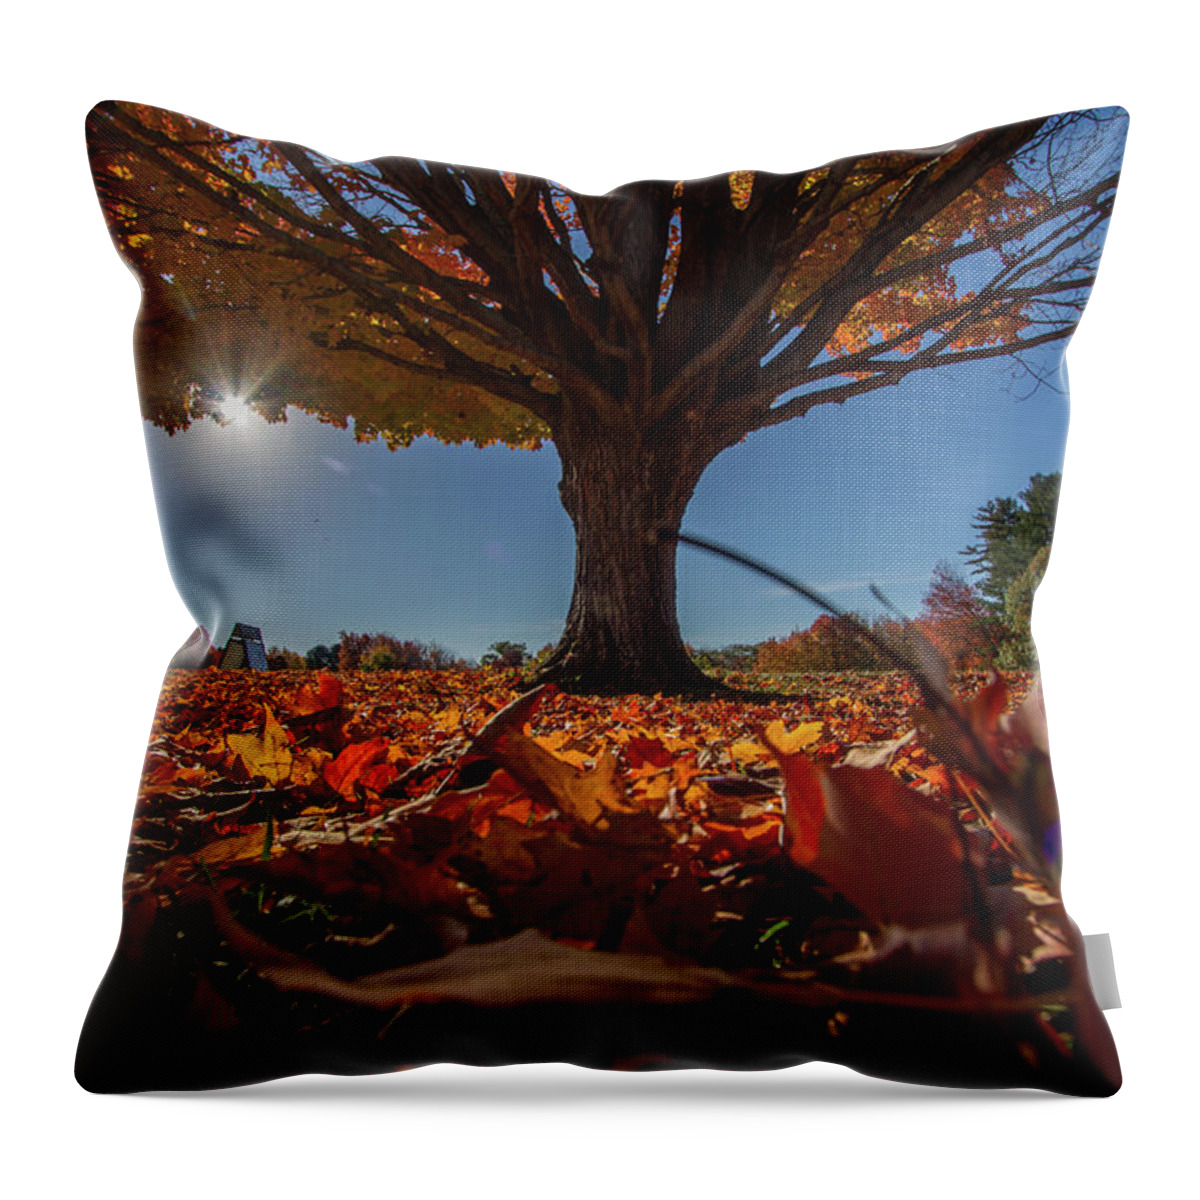 Sunlight Throw Pillow featuring the photograph Leaves by Darryl Hendricks